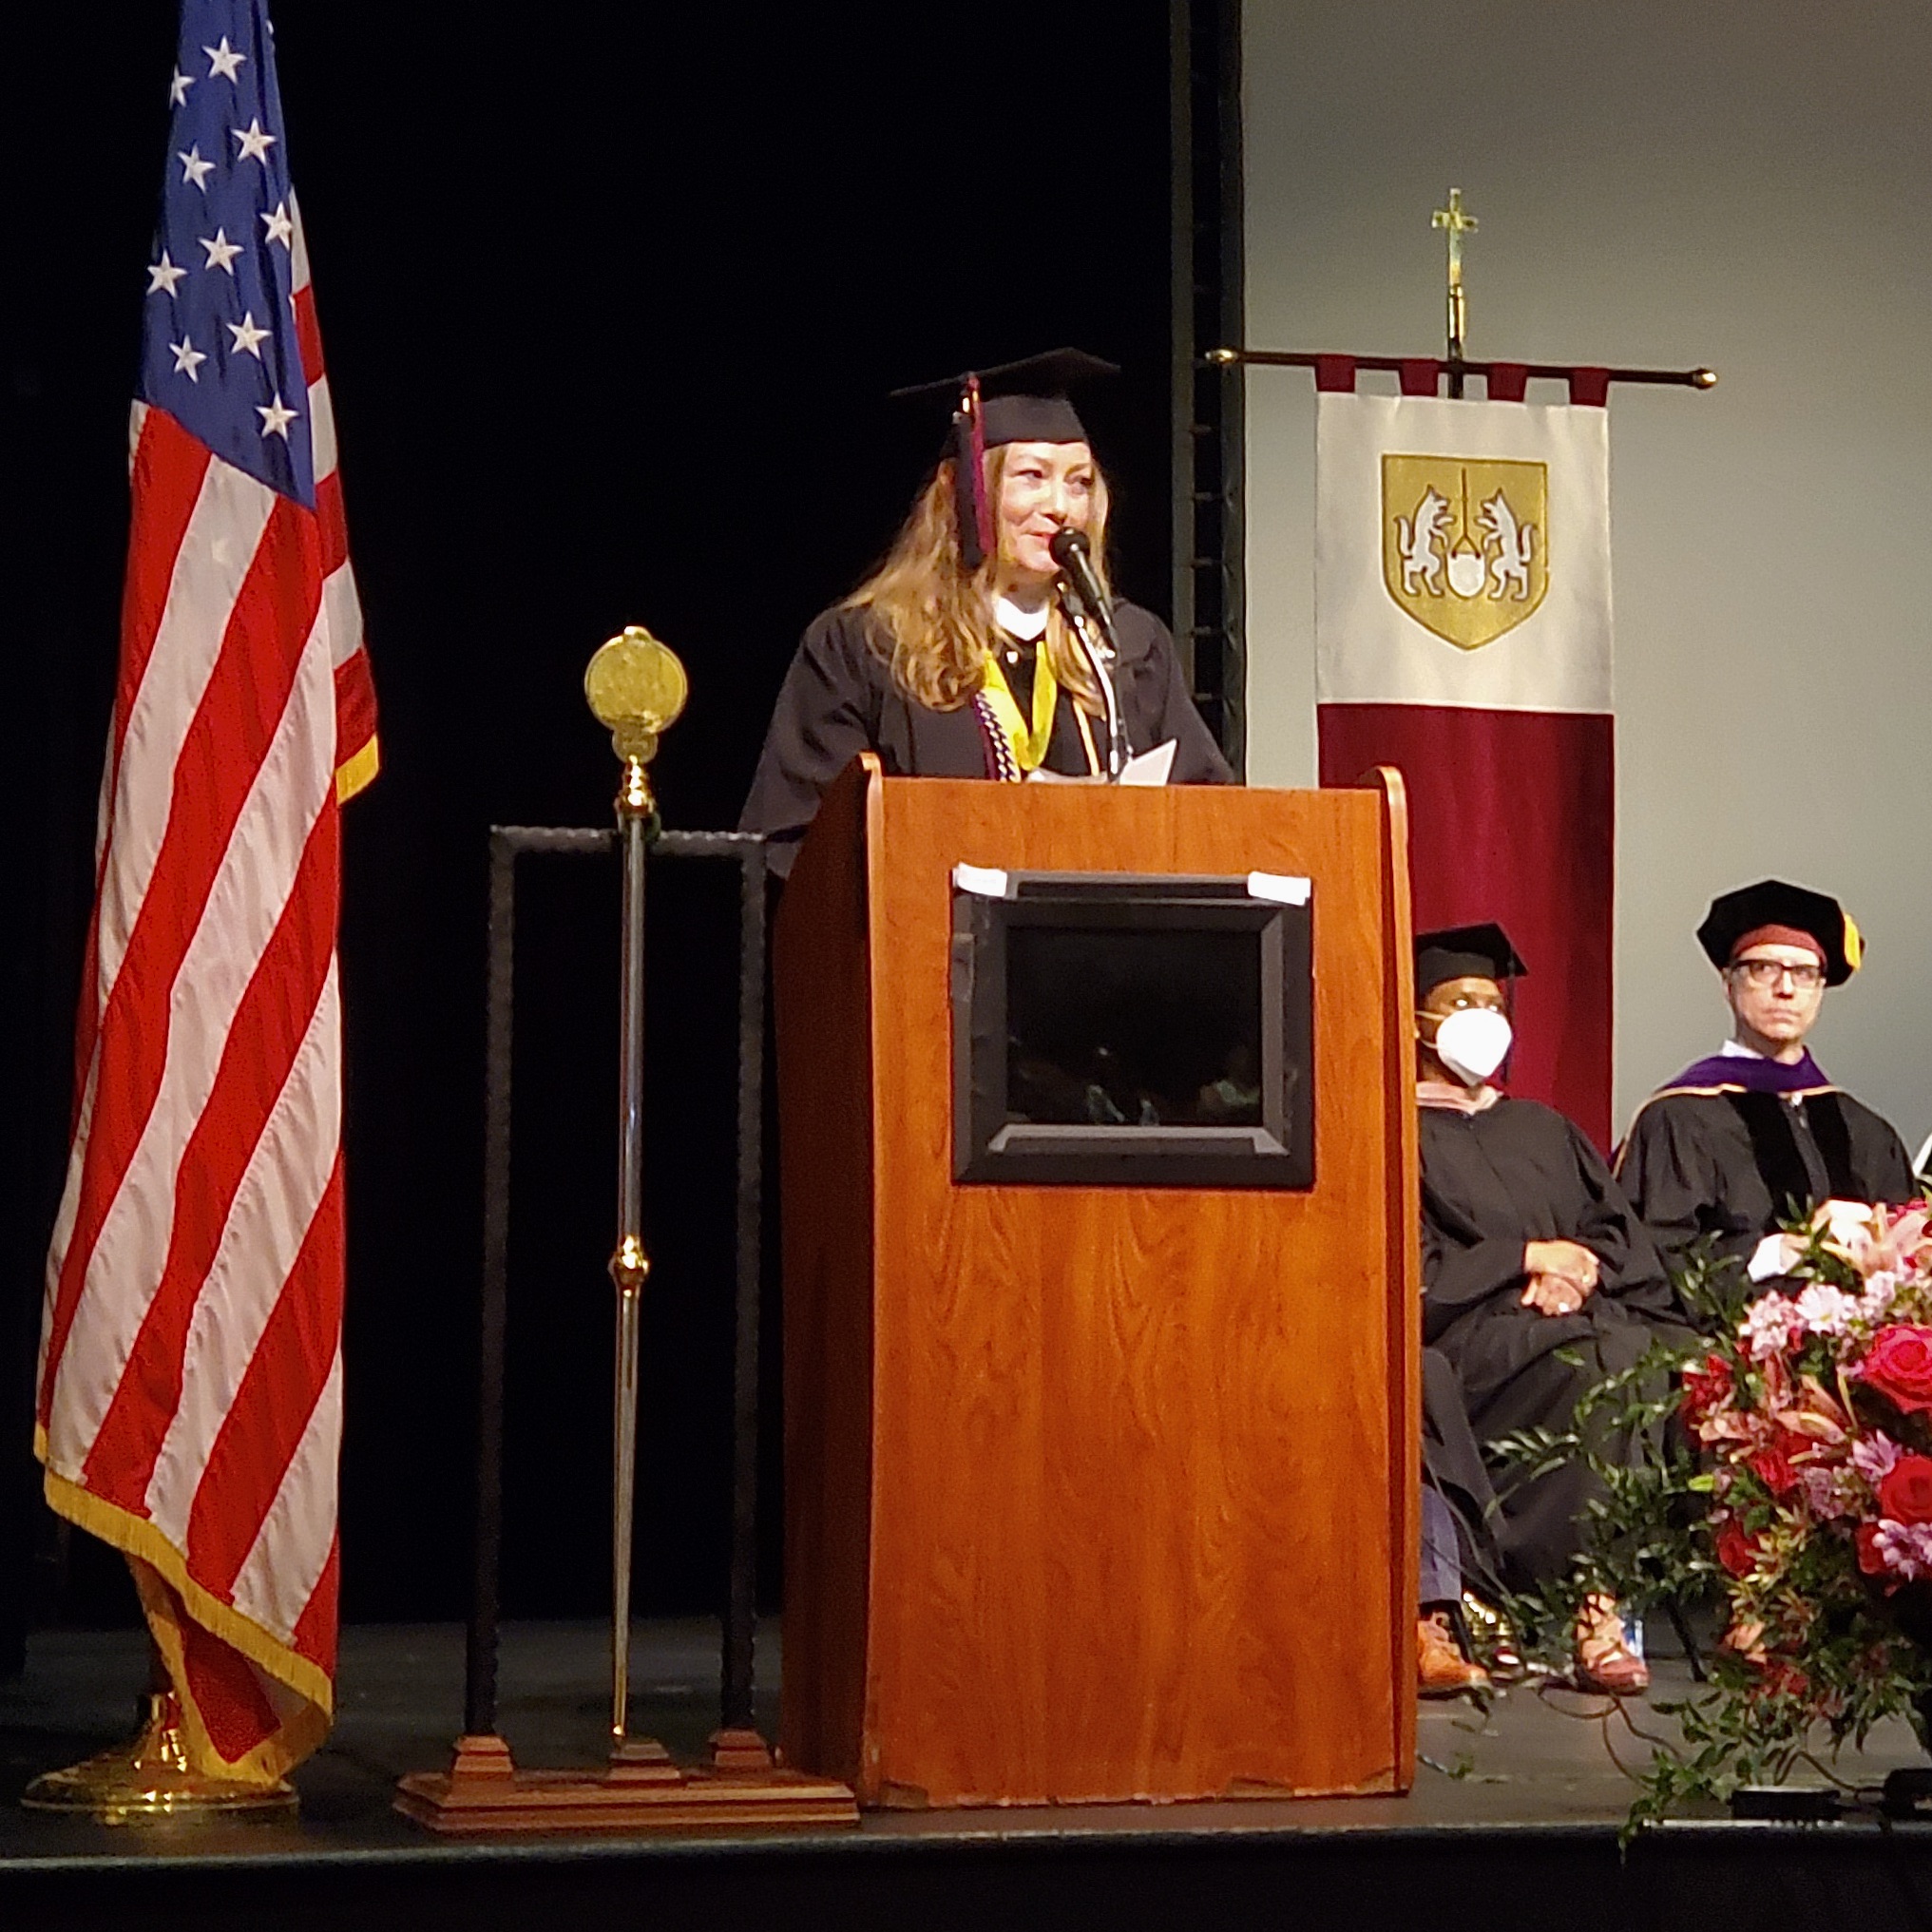 A woman wearing a graduation gown speaks in front of a podium.